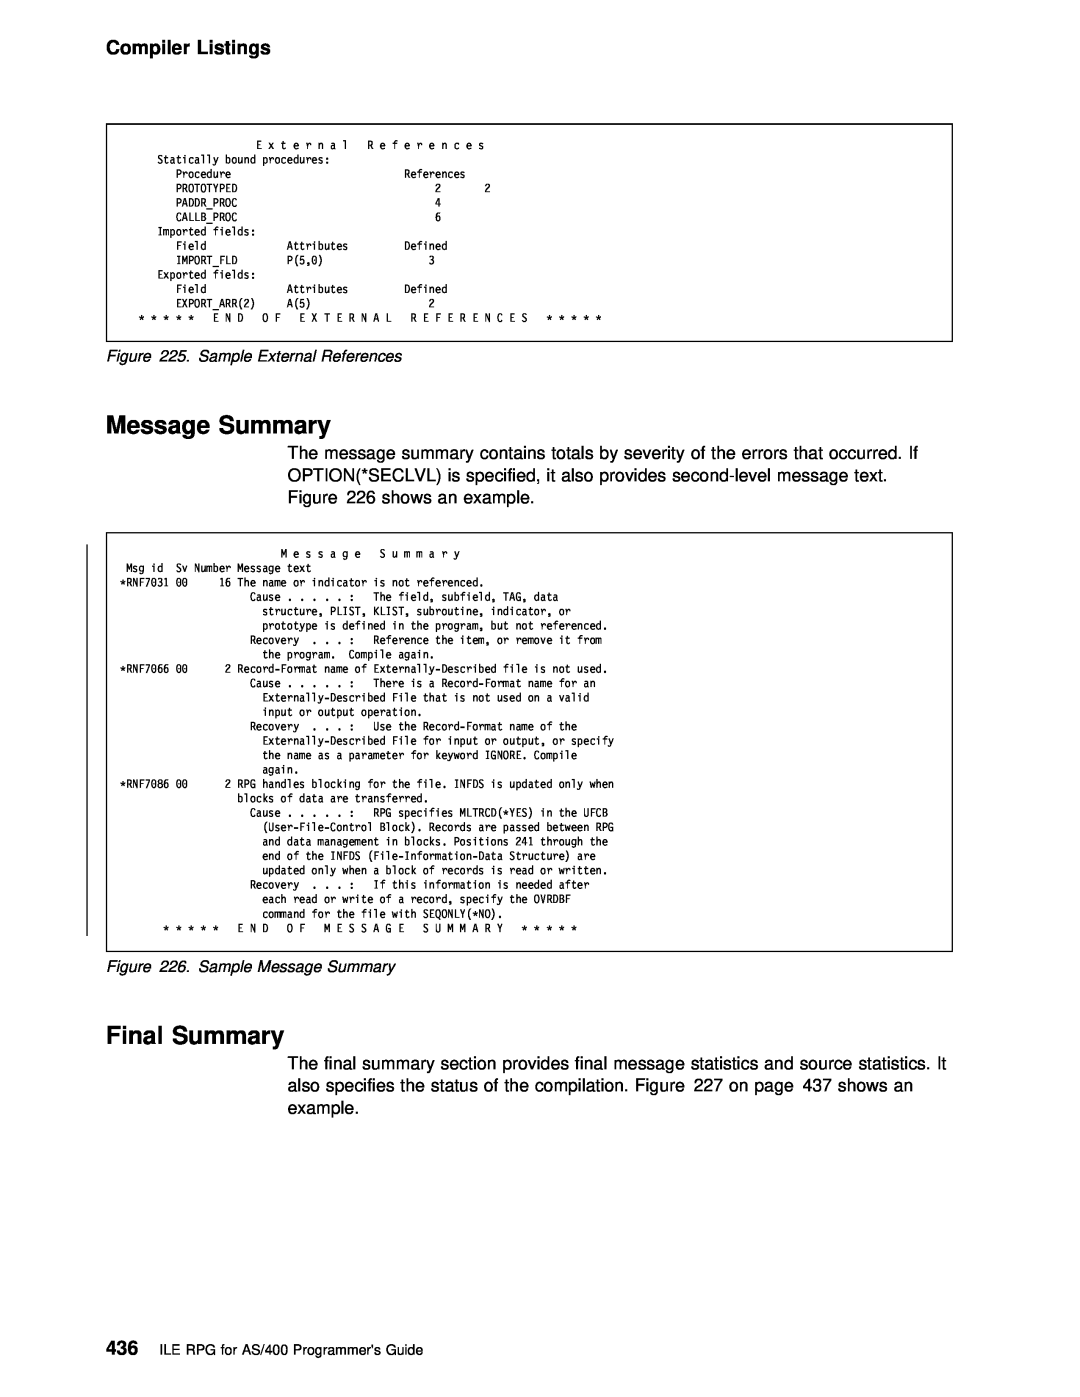 IBM AS/400 manual Final Summary, Compiler Listings, Sample External References, Sample Message Summary 